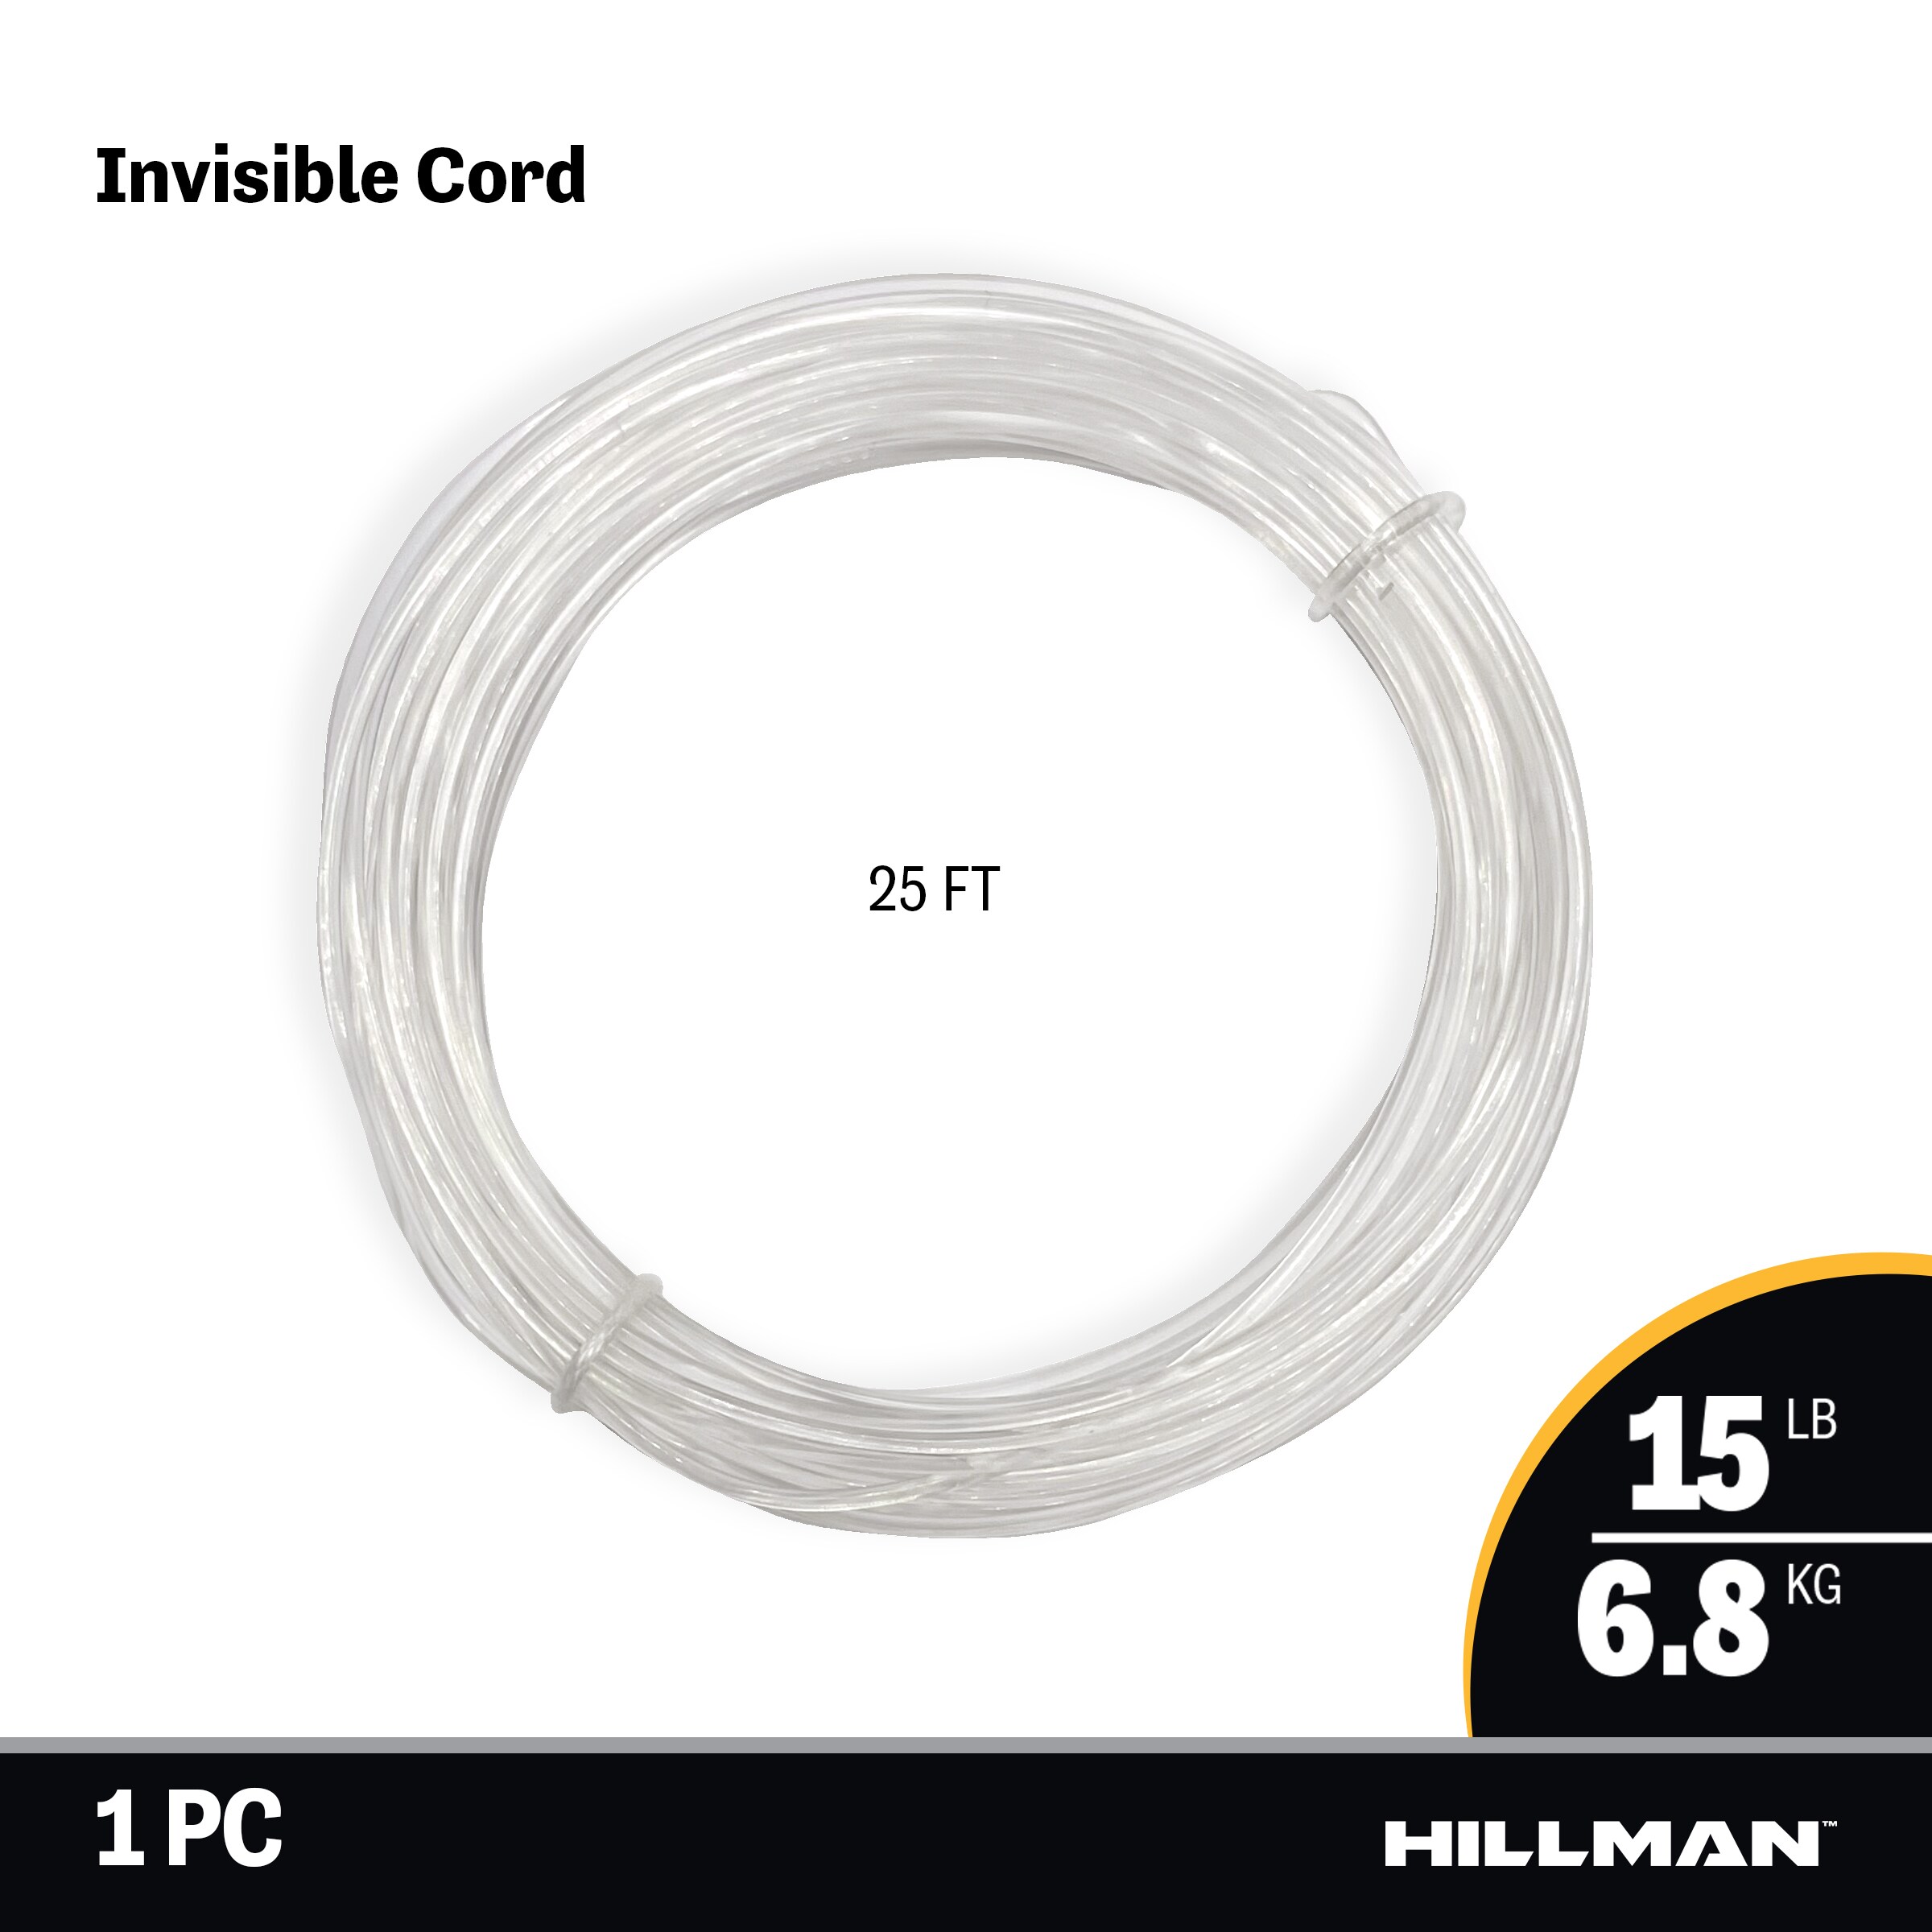 HILLMAN Invisible Cord Hobby Wall Picture Hanger Up To 15 lbs  25' Long 123002 